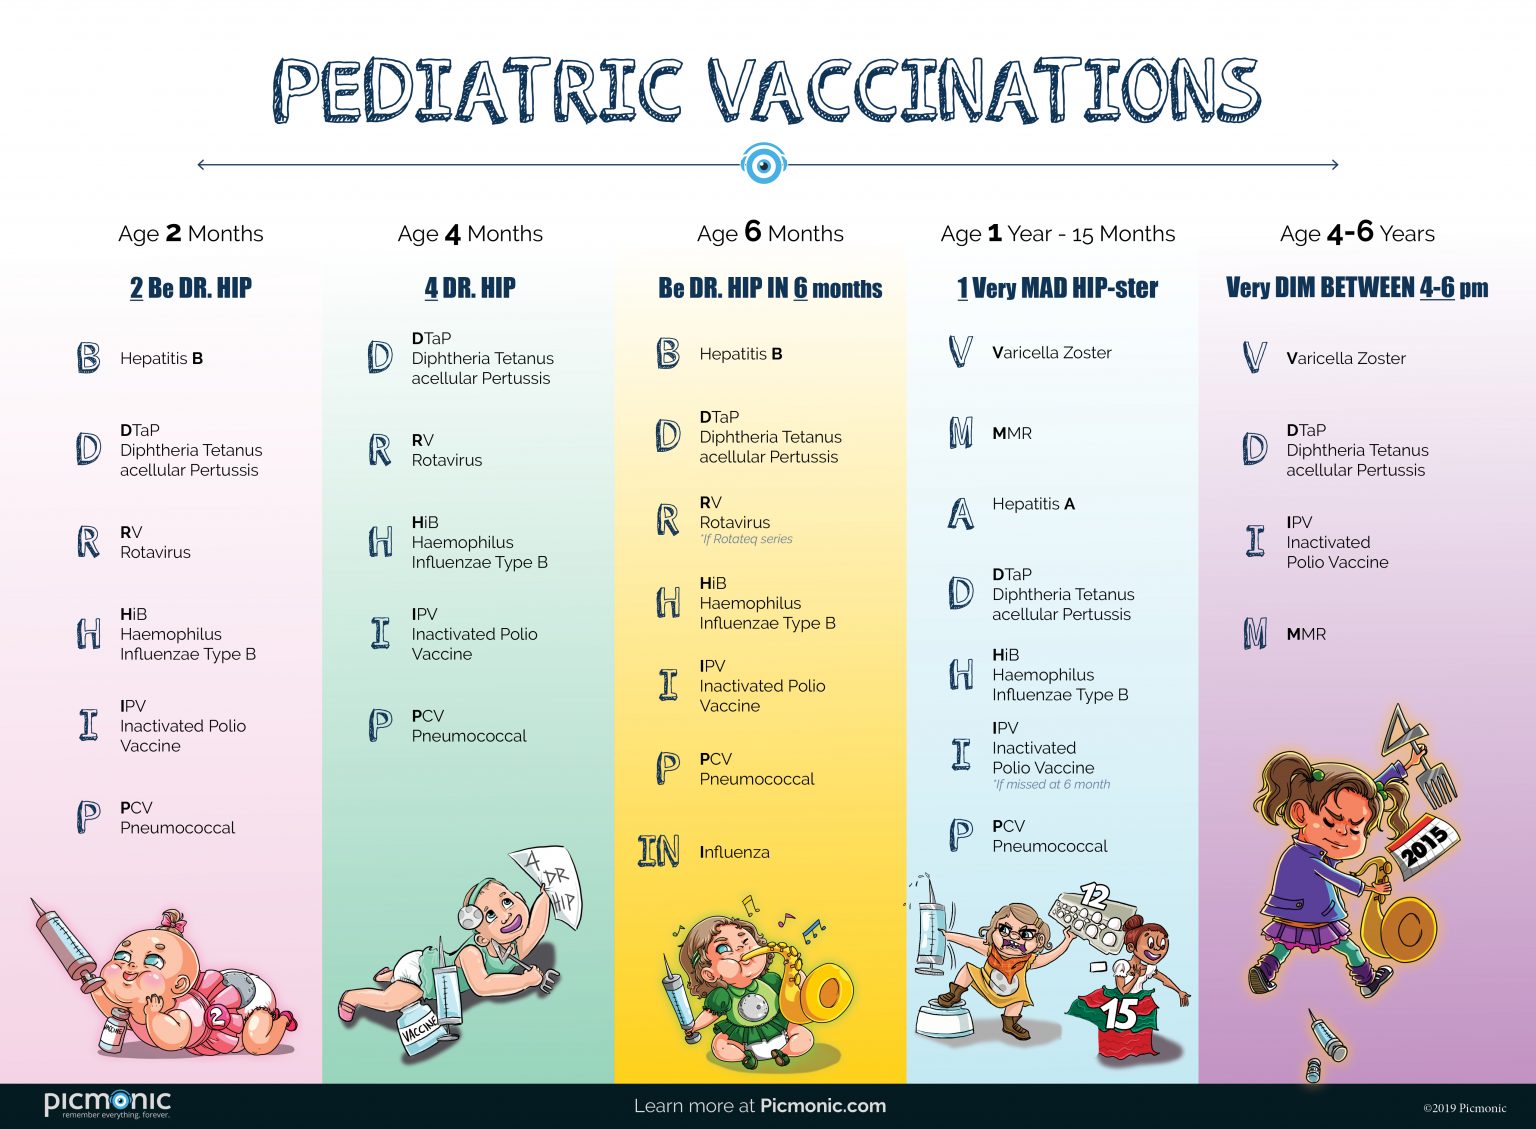 [Infographic] How to Study Pediatric Vaccinations